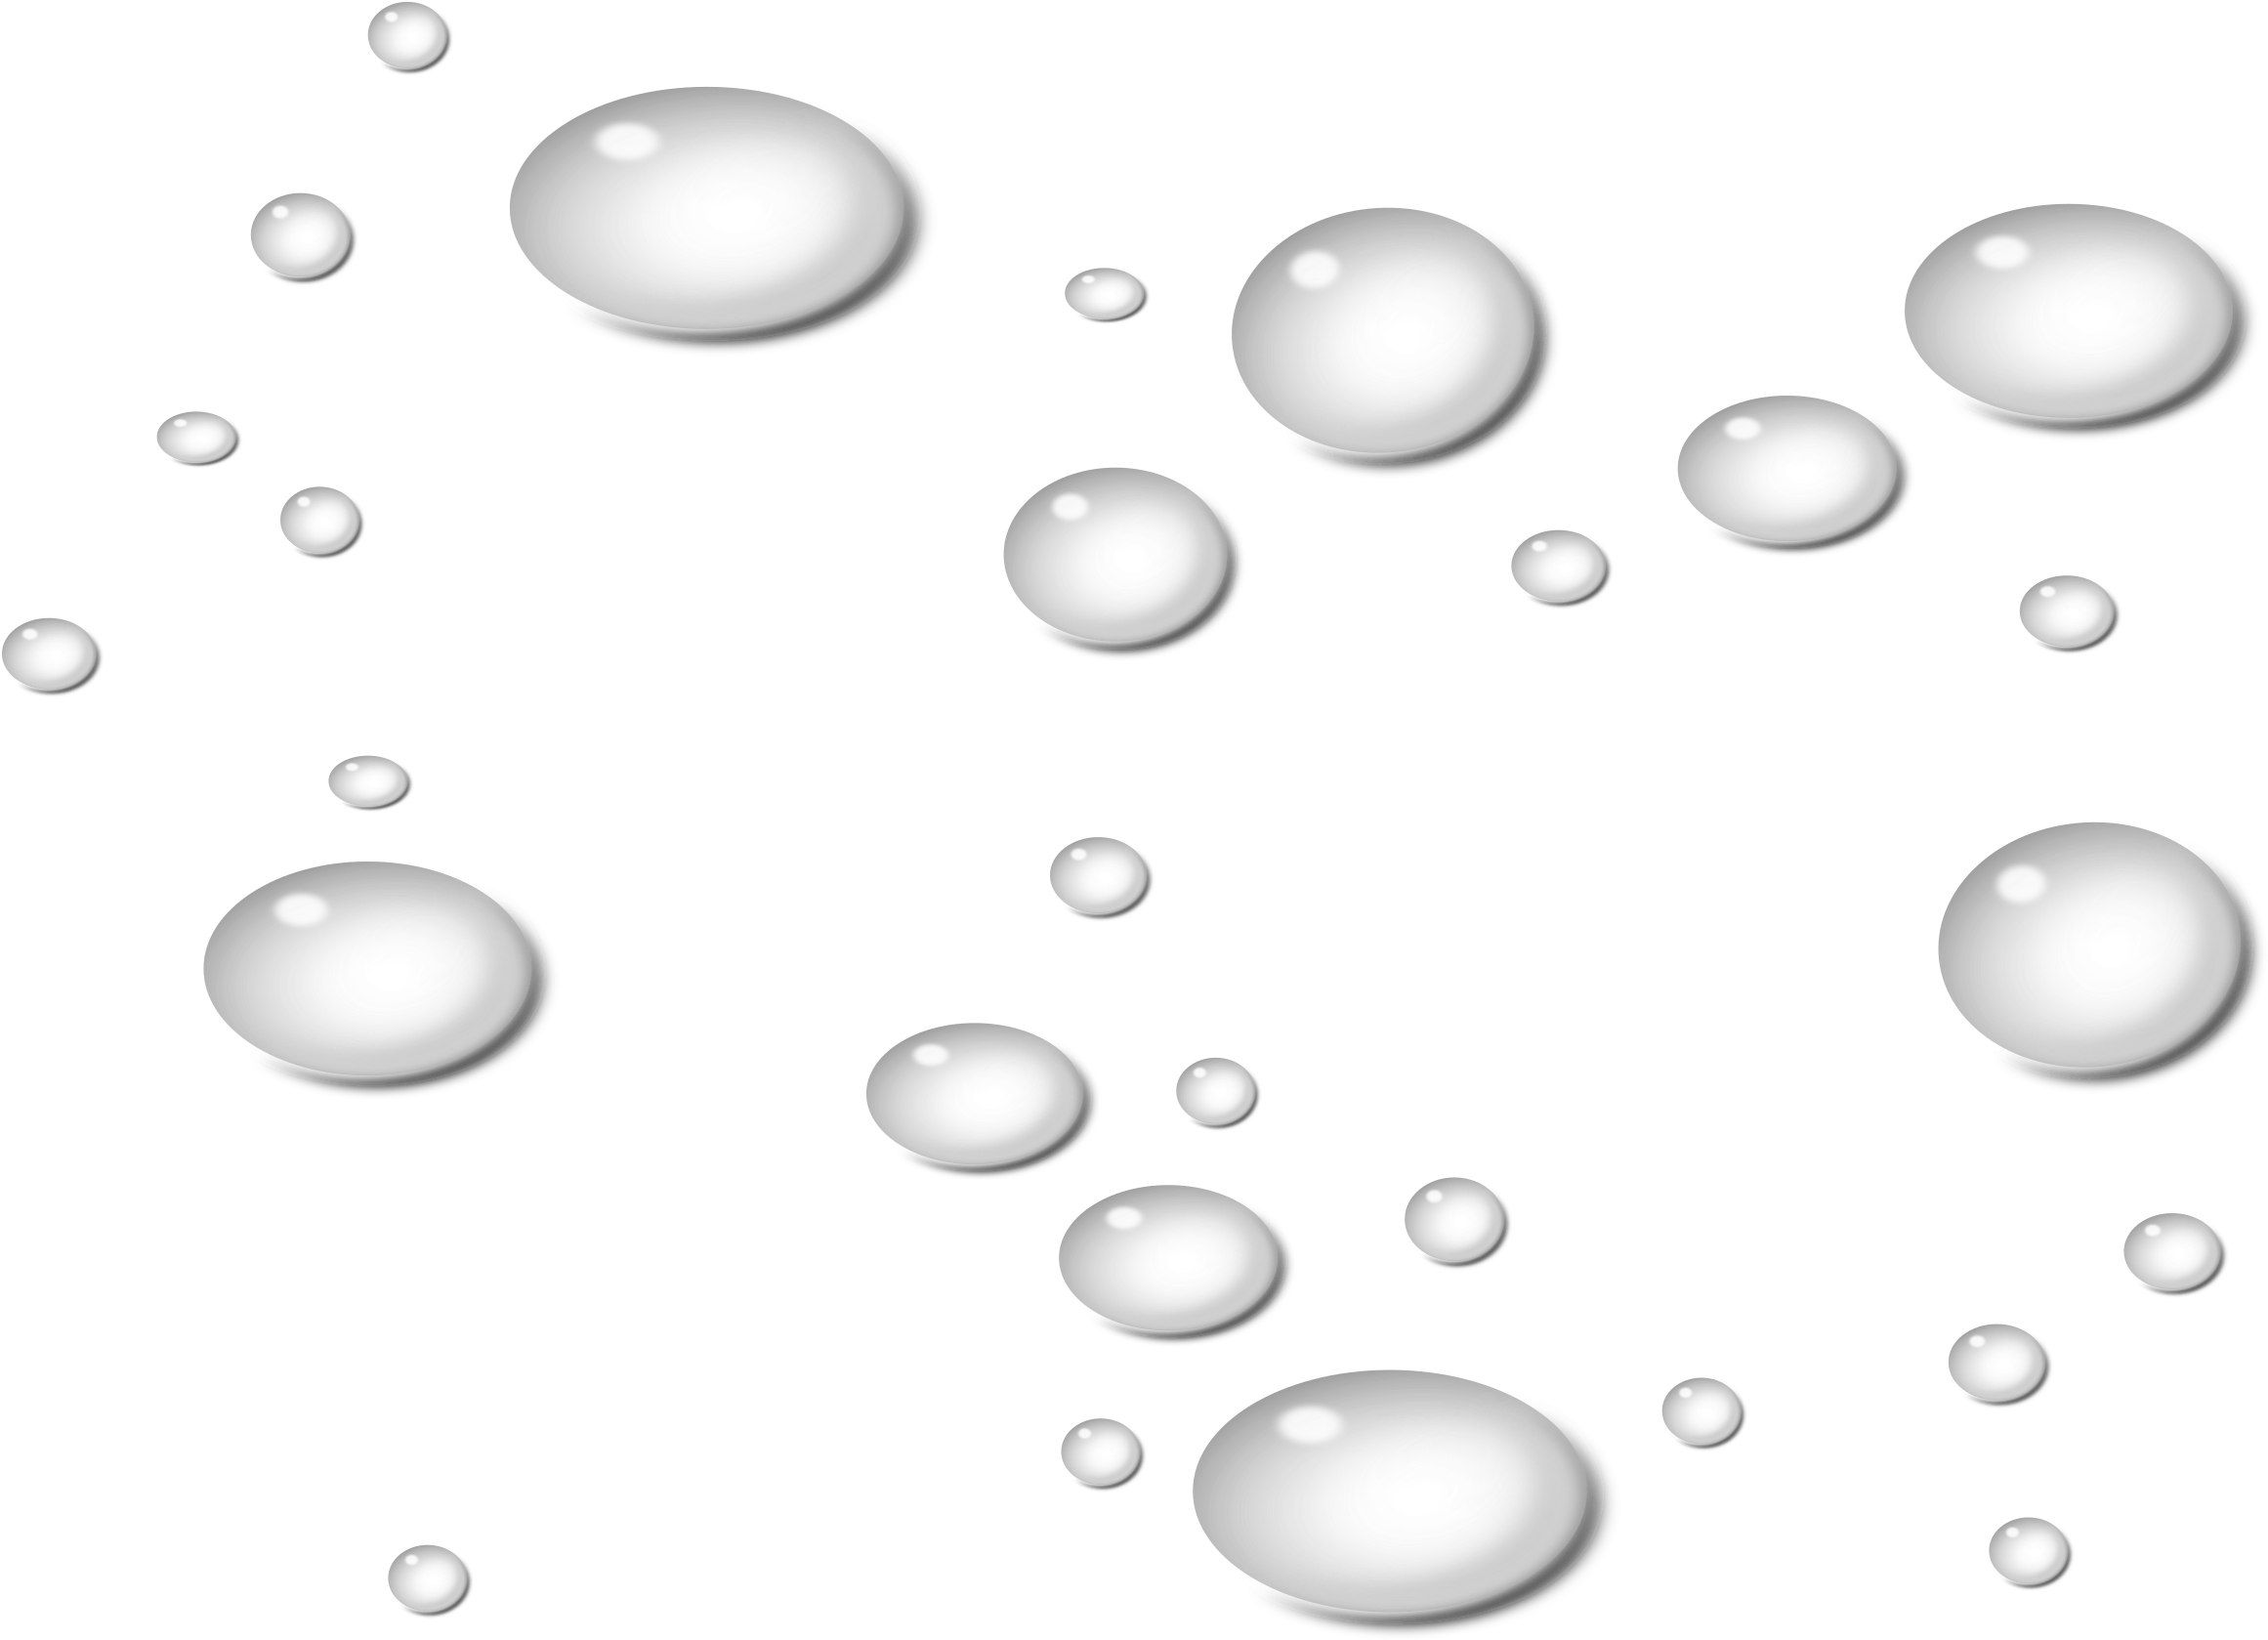 A Group Of Bubbles On A Black Background